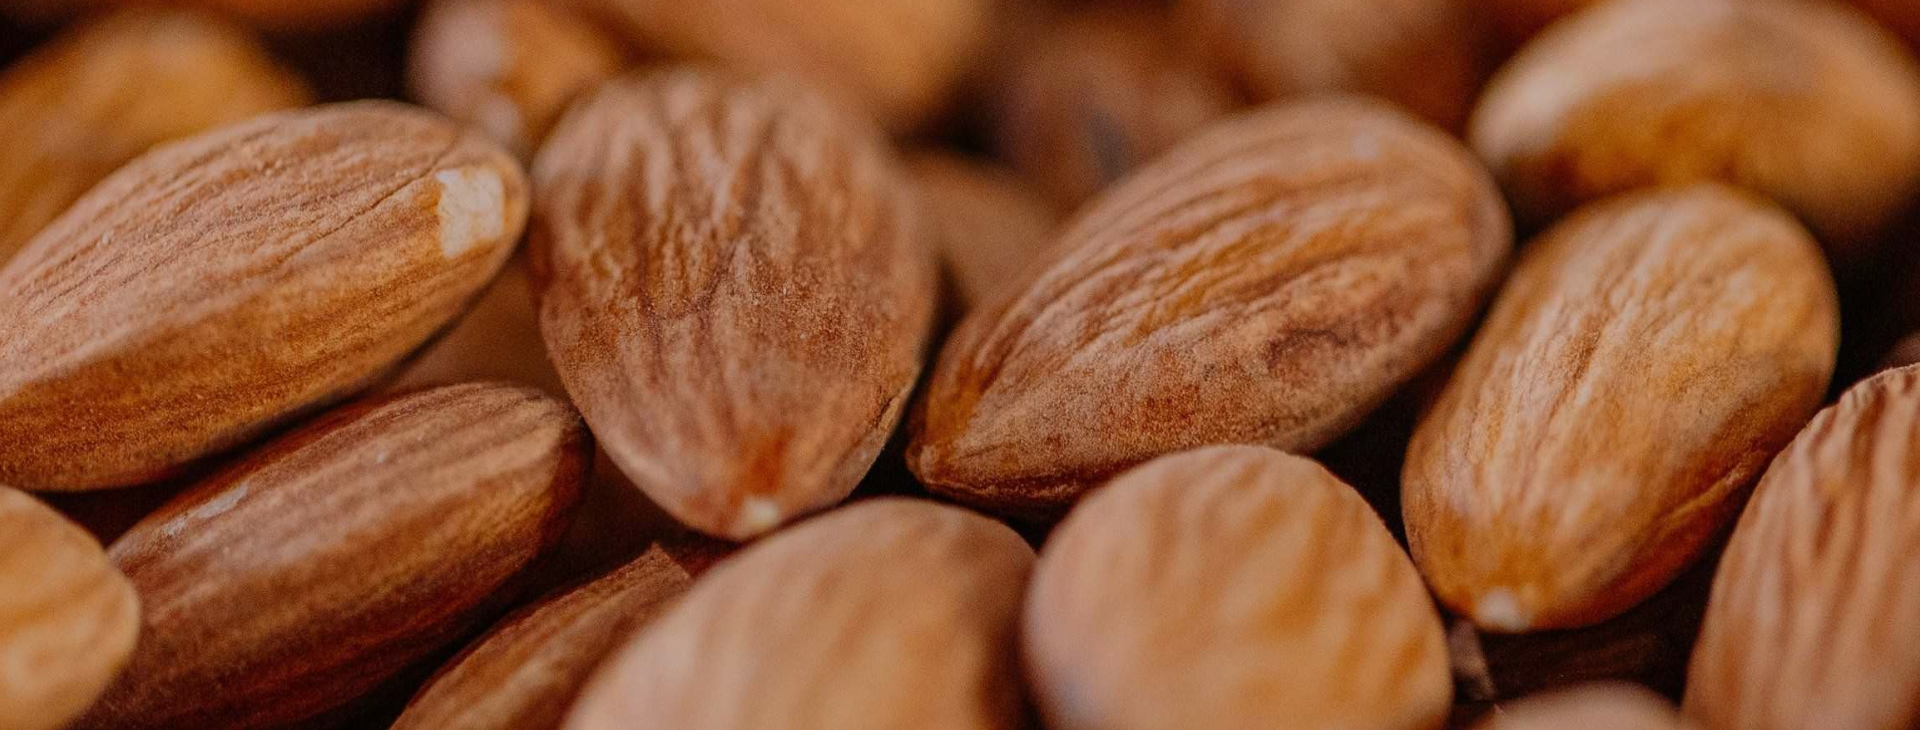 Pile of Whole Almonds - More Almond Products